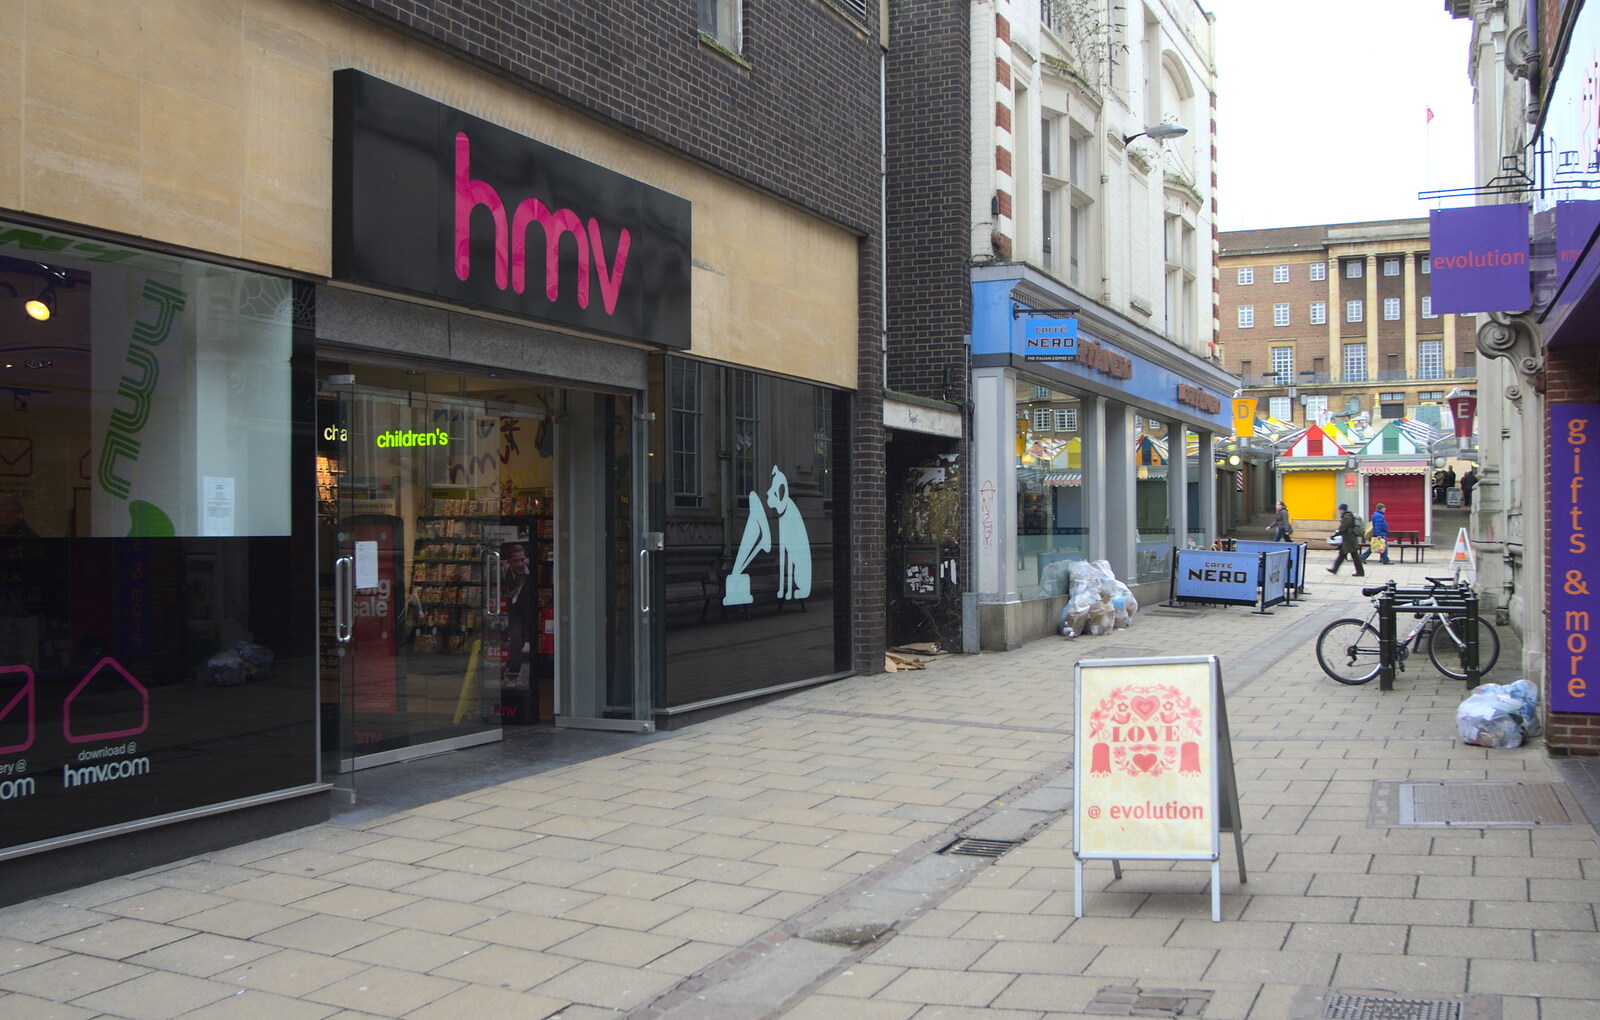 HMV in Norwich looks like it's closing down from Sunday Lunch at the Village Hall, Brome, Suffolk - 3rd February 2013